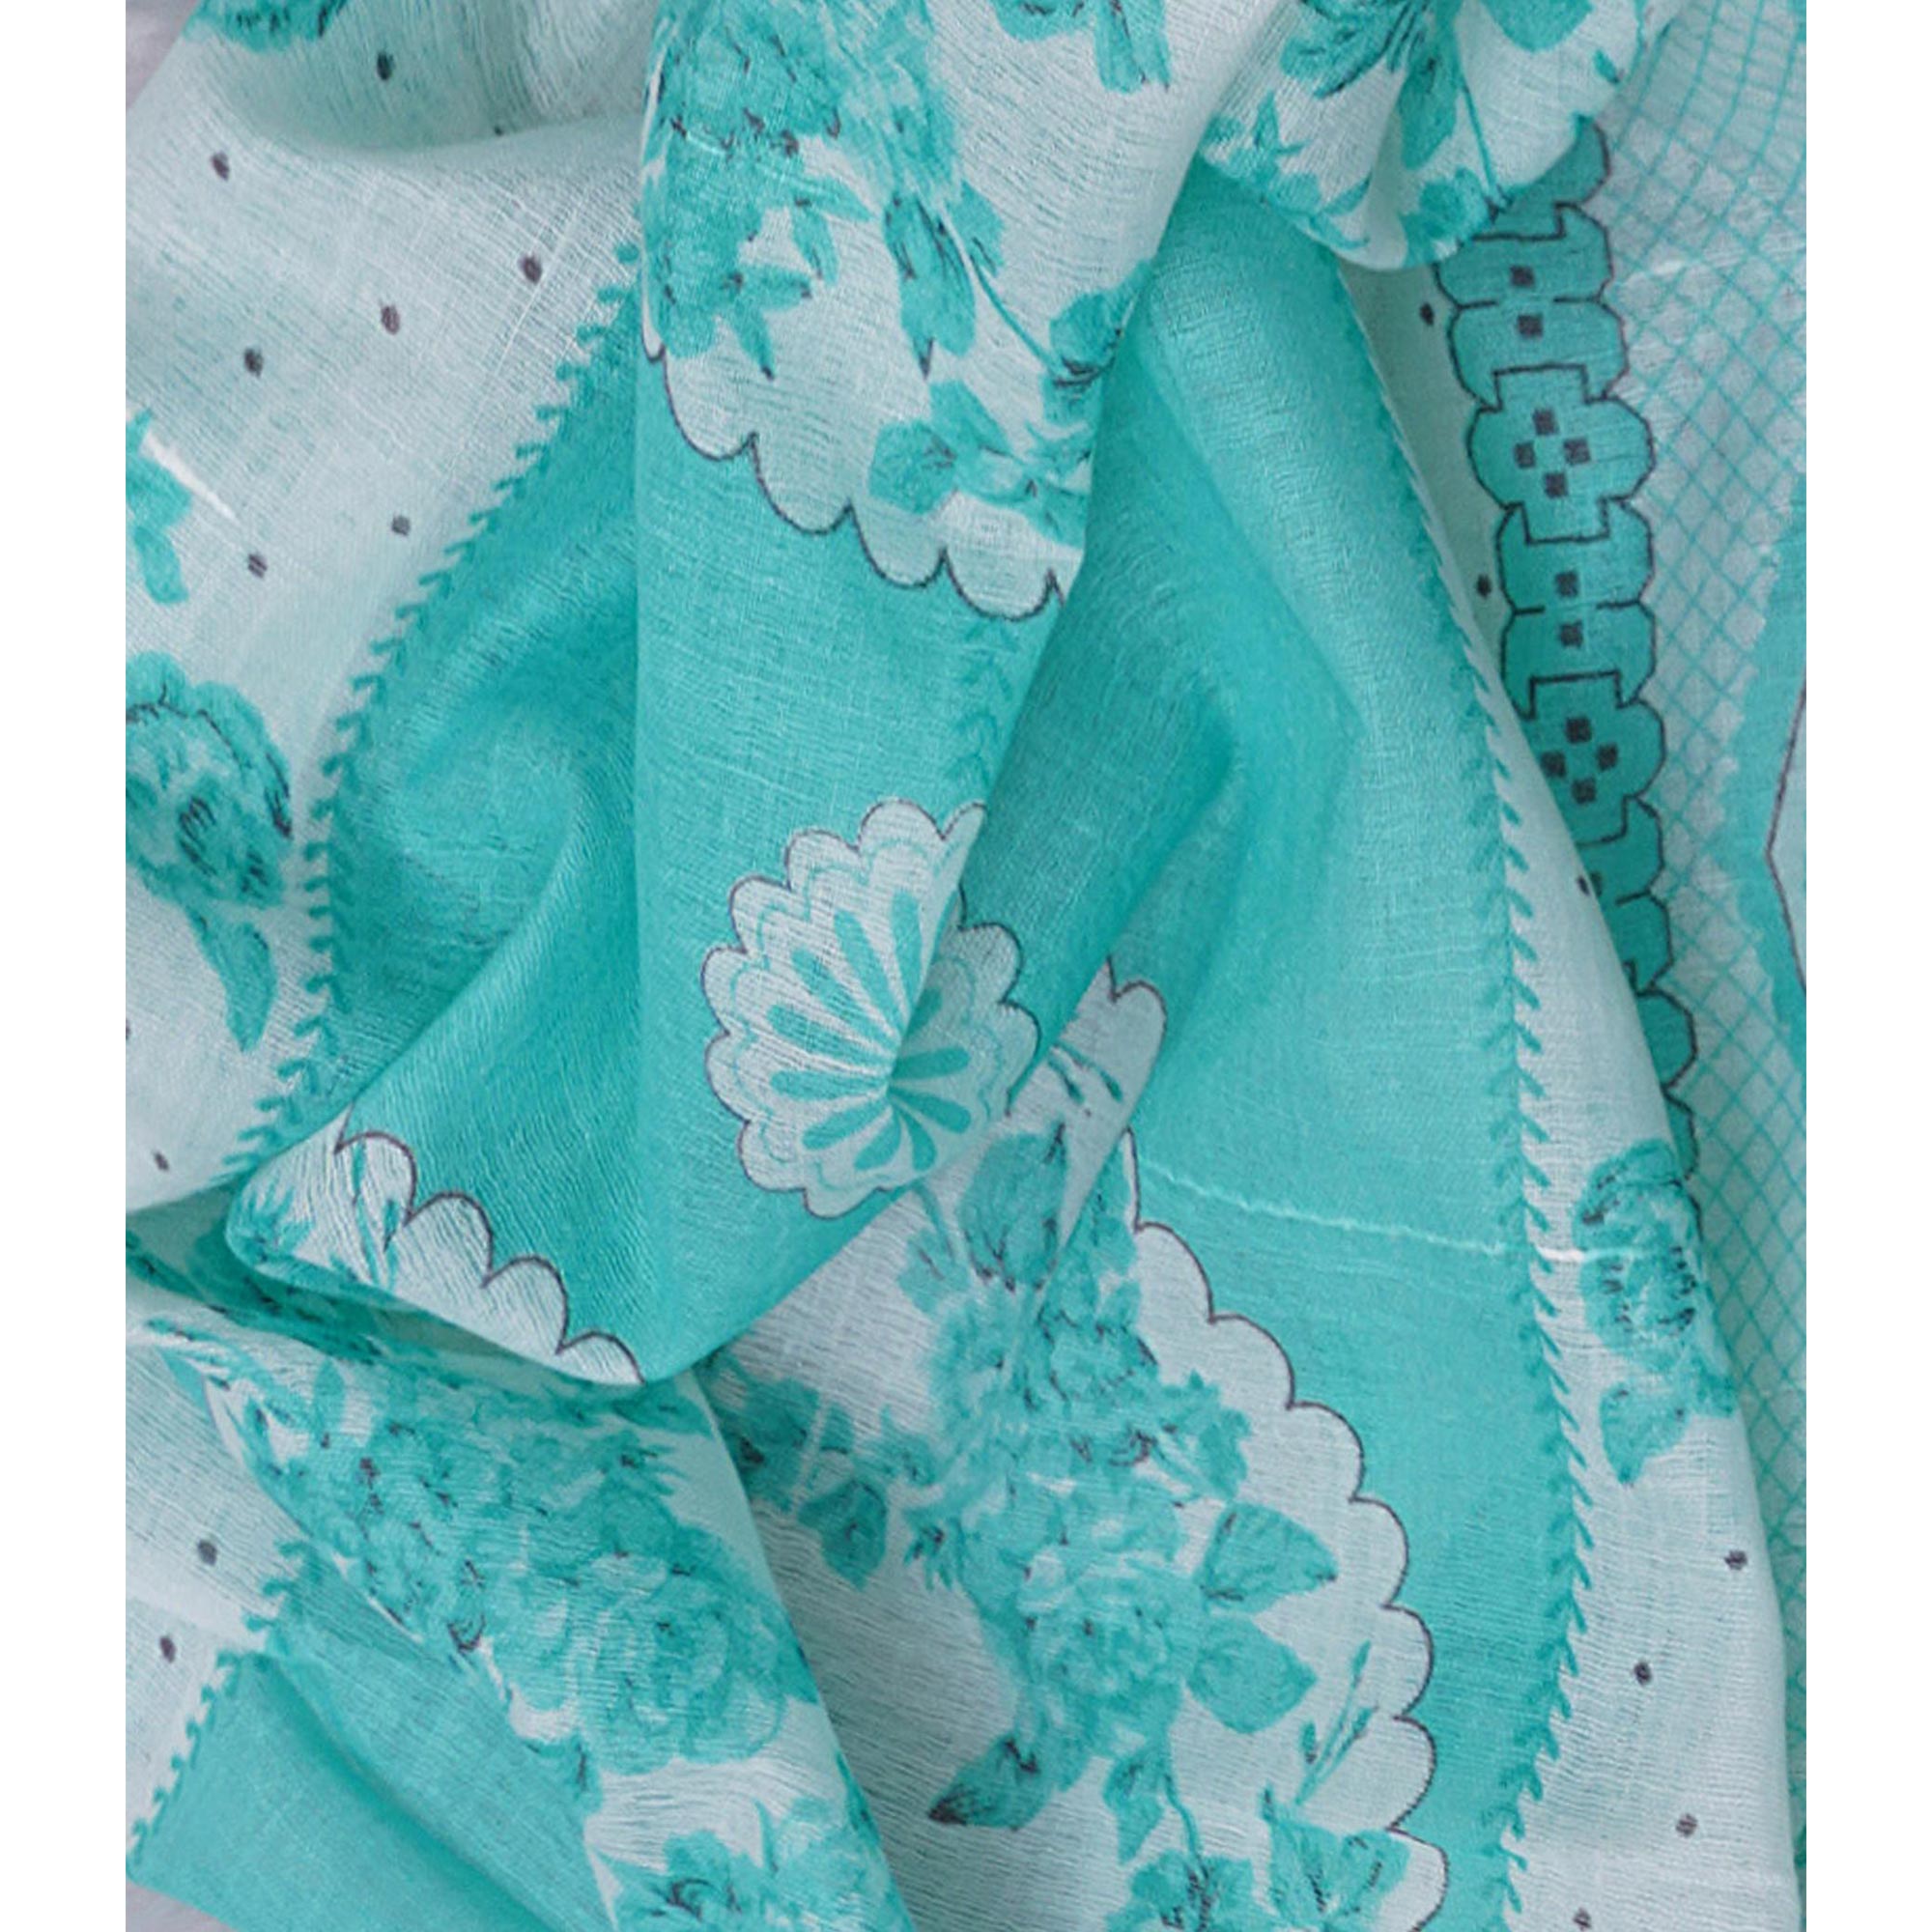 Turquoise Printed With Gota Patti Work Cotton Blend Dress Material